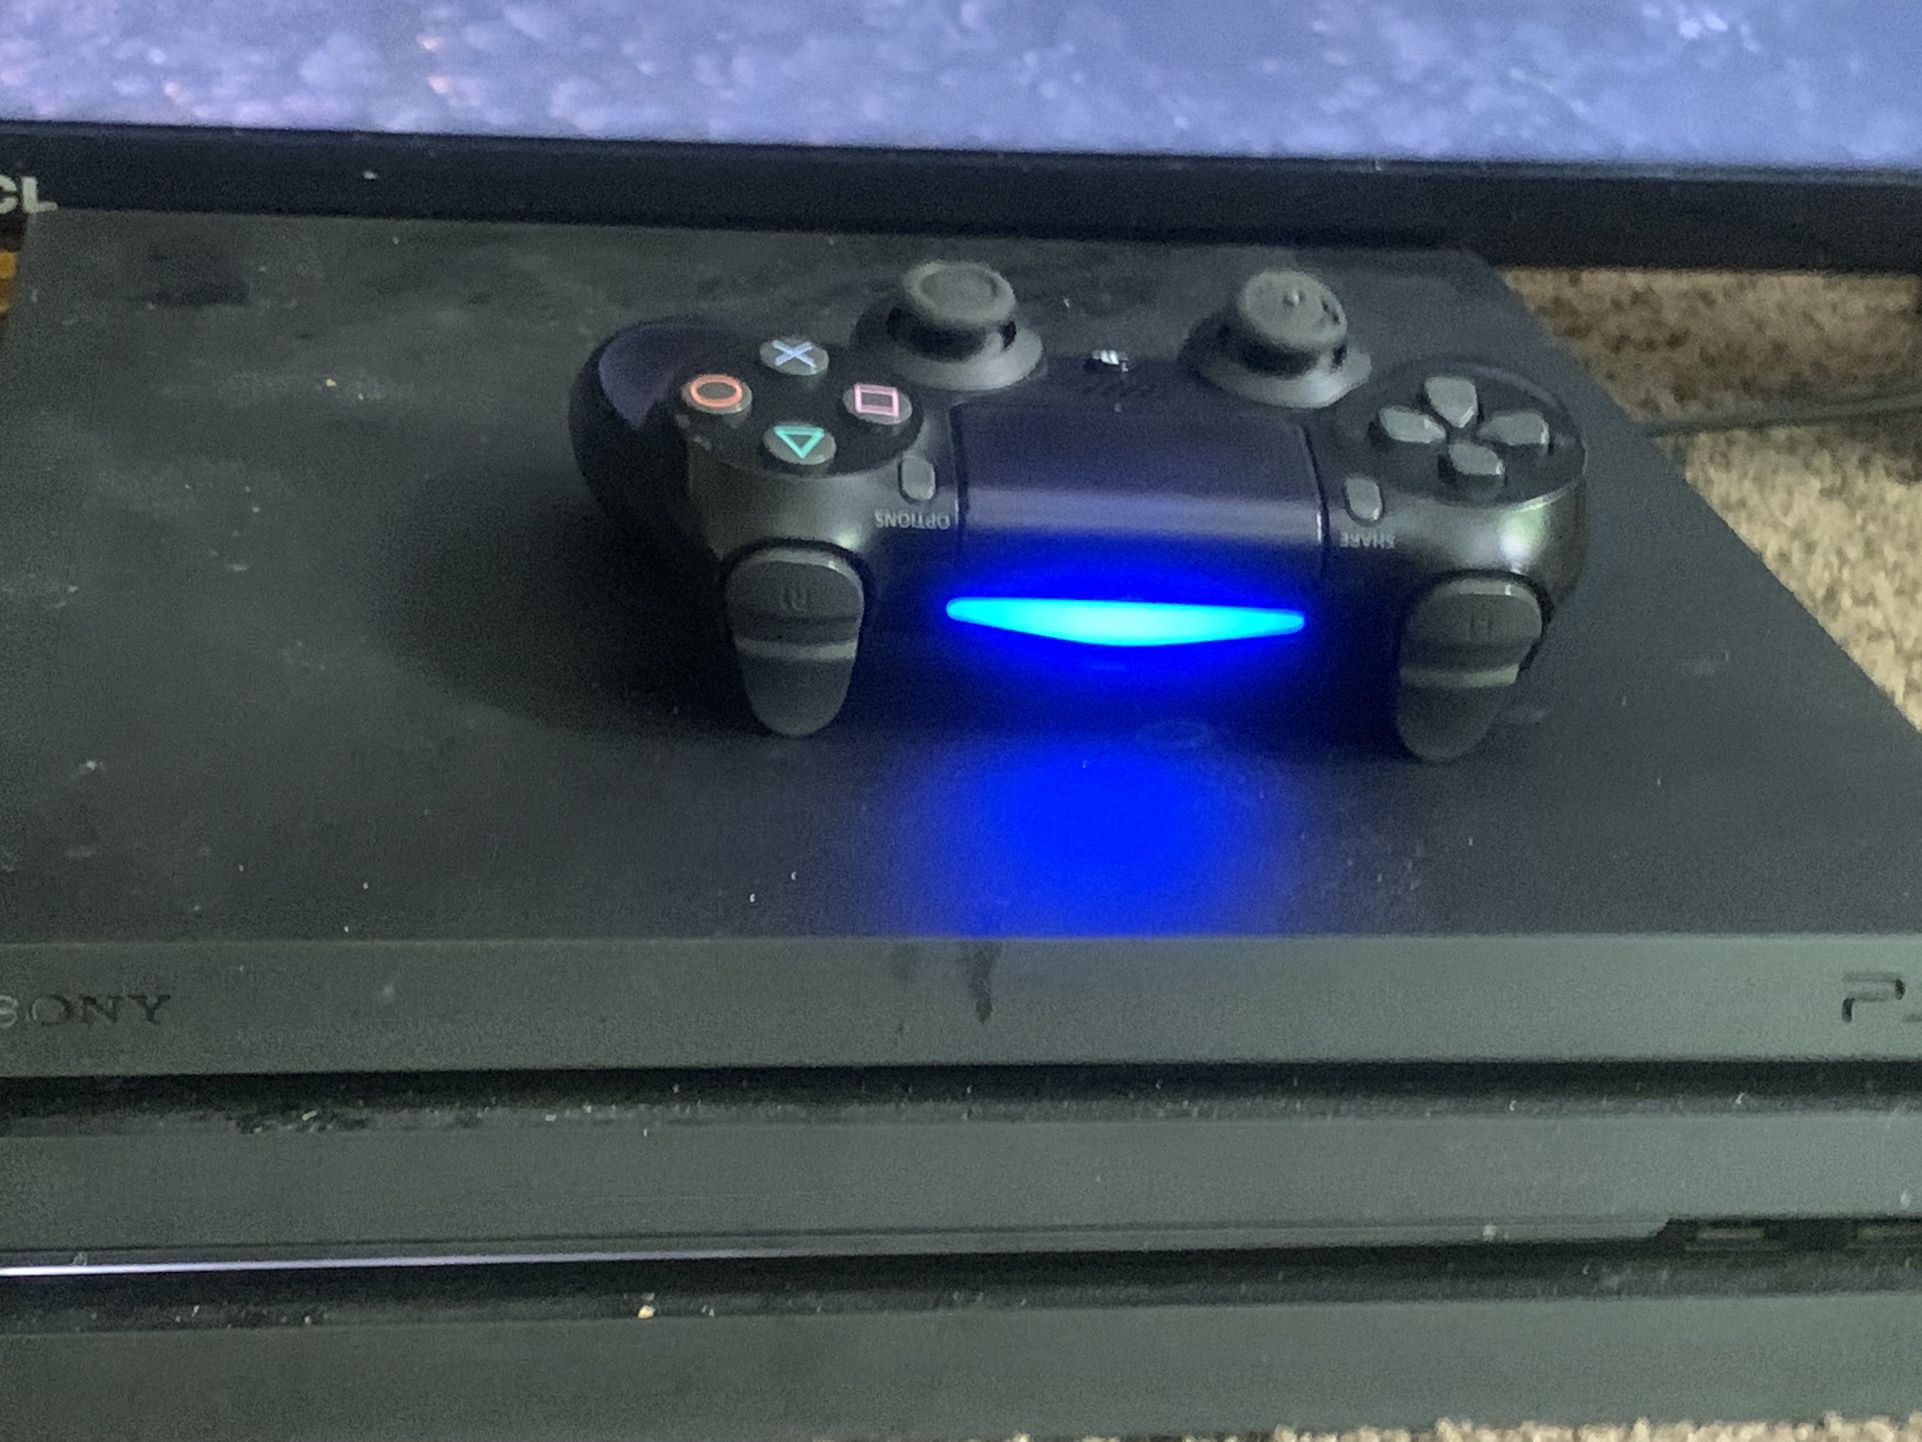 ps4 pro for Sale in Raleigh, NC - OfferUp